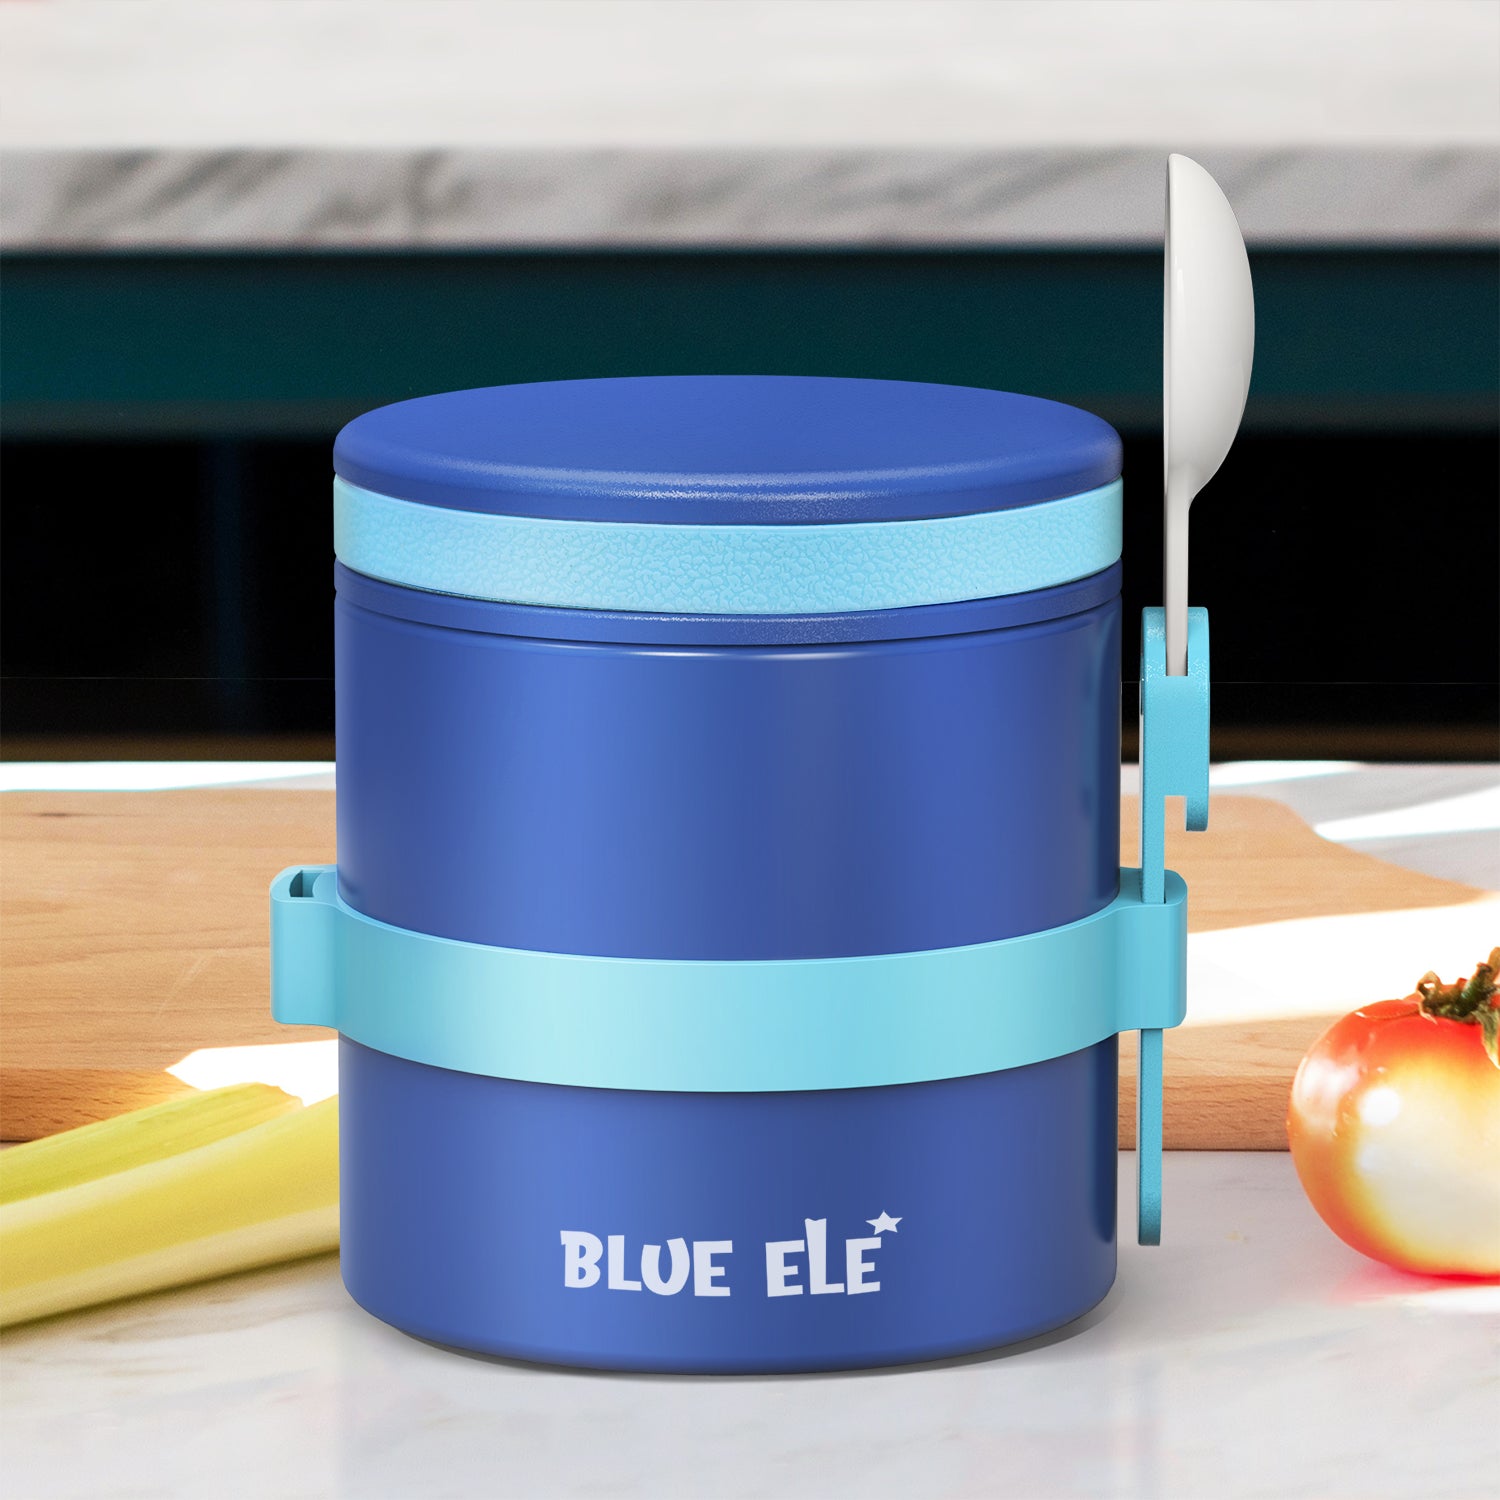  Food thermos with folding spoon and cup 470 ml blue -  Stainless steel vacuum insulated thermos - THERMOS - 32.90 € - outdoorové  oblečení a vybavení shop